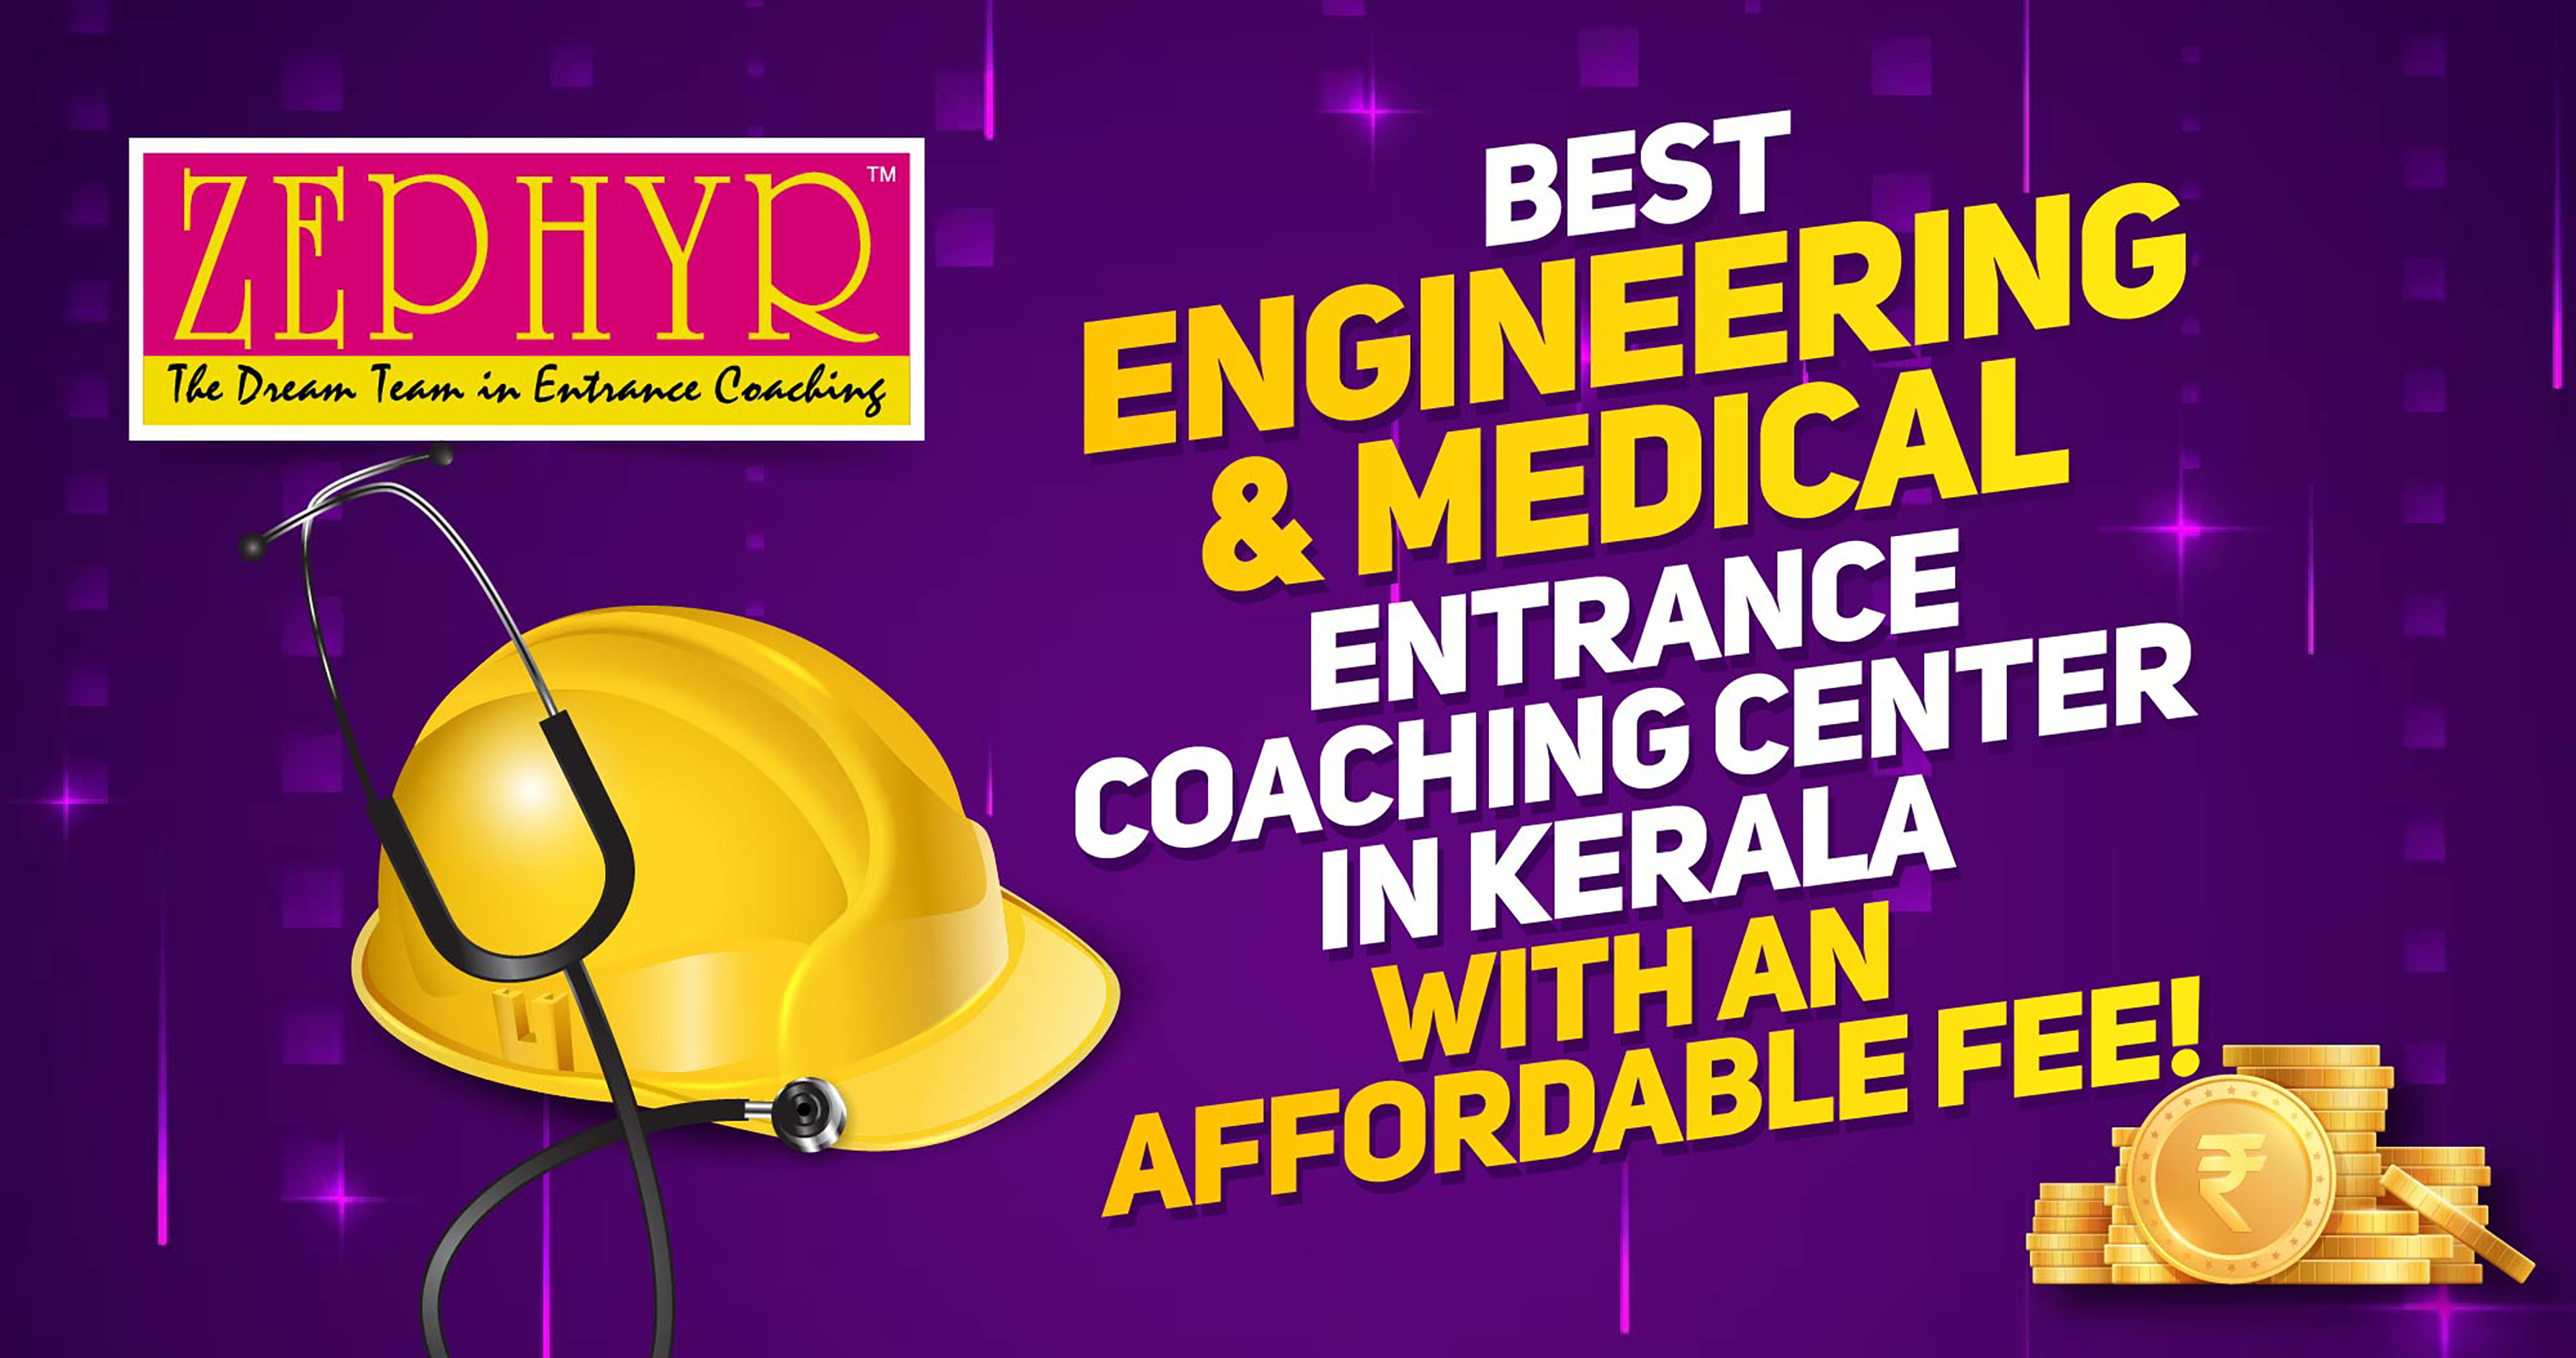 Best engineering entrance exam coaching center in Kerala with an affordable fee